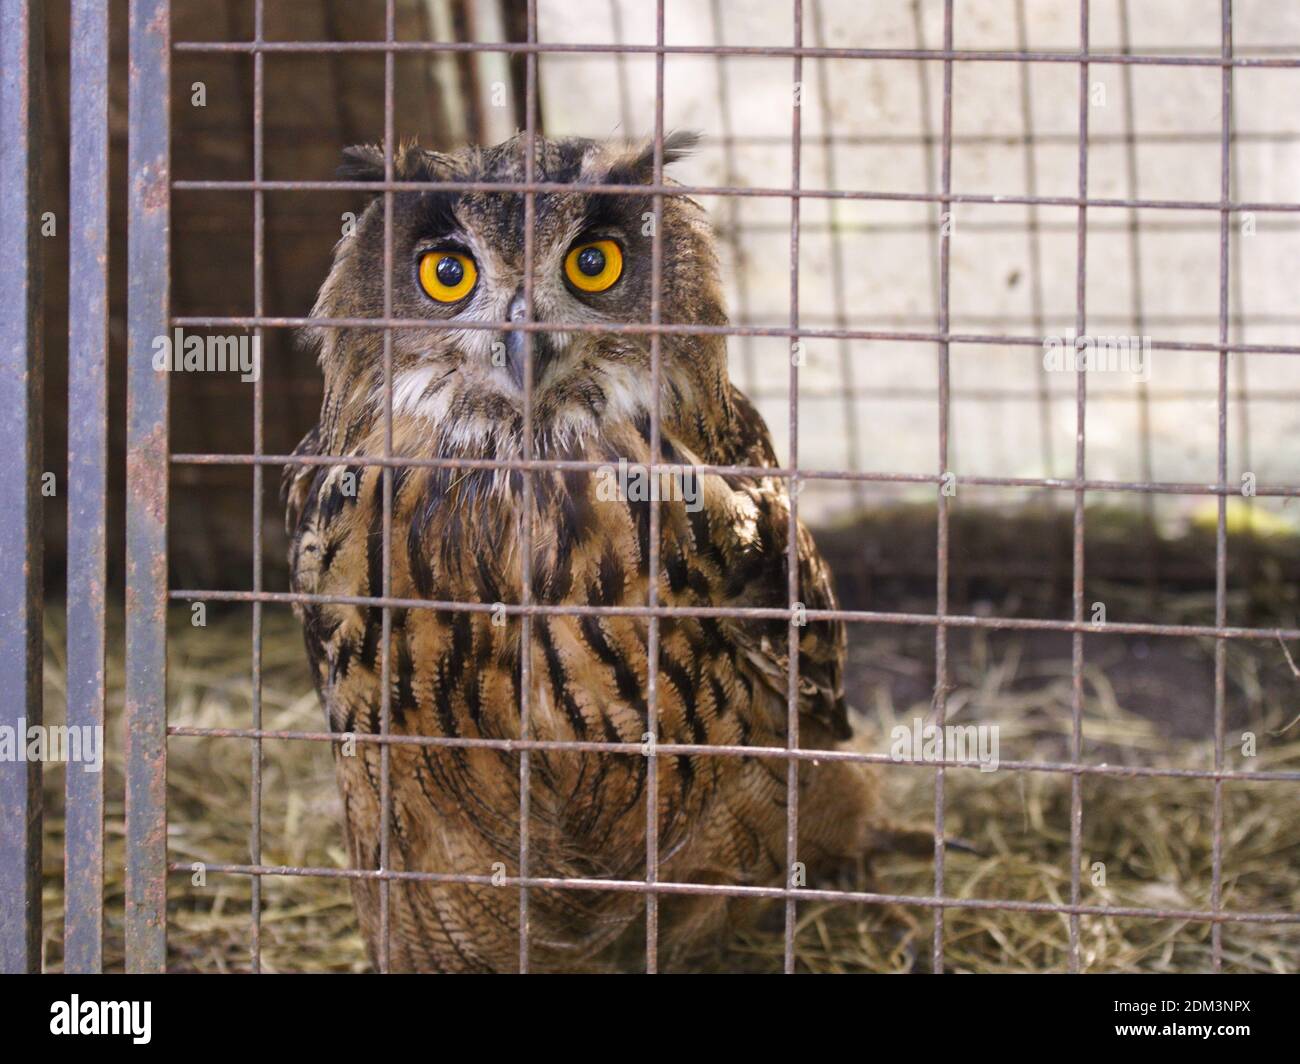 Portrait Of Owl In Cage Stock Photo - Alamy